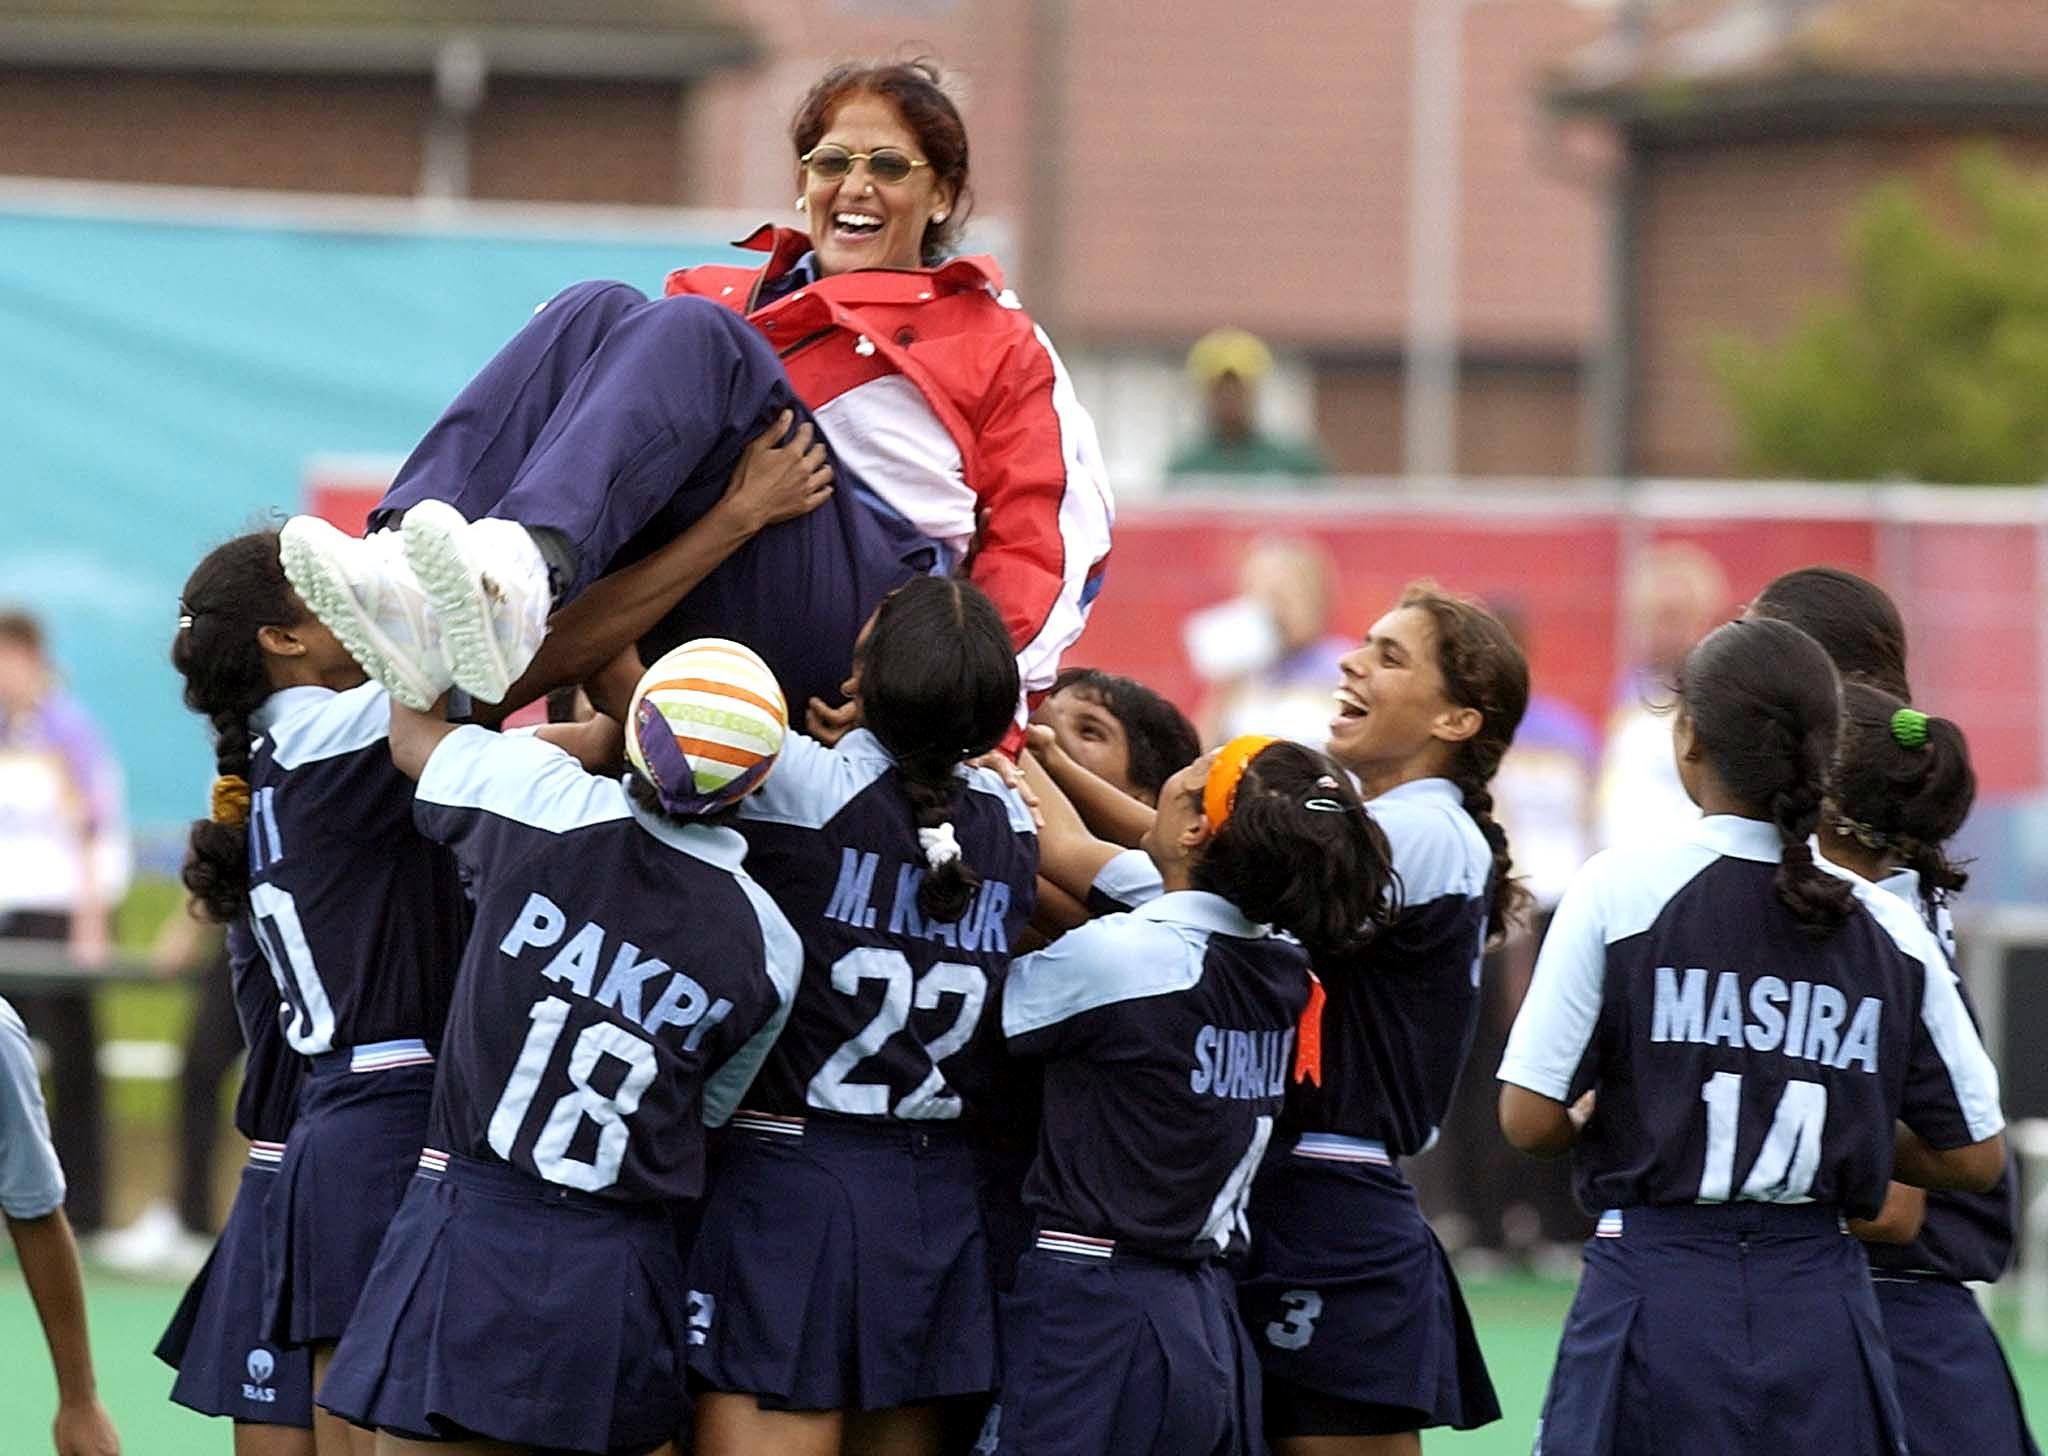 The Indian women's hockey team won gold at the Manchester 2002 Commonwealth Games ©Getty Images